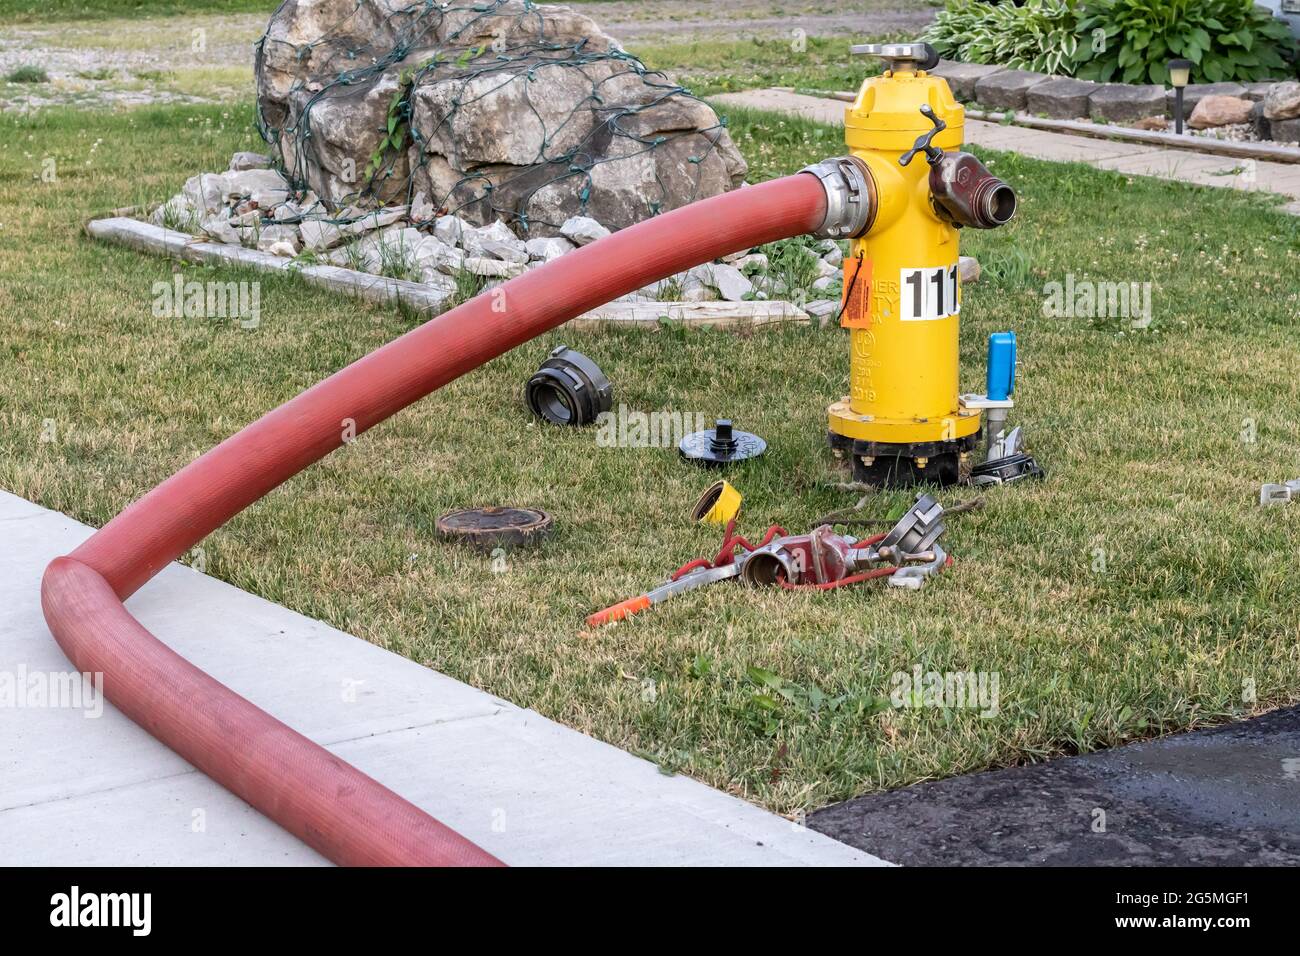 Fire hydrant water supply during emergency hooked to hose at day Stock  Photo - Alamy